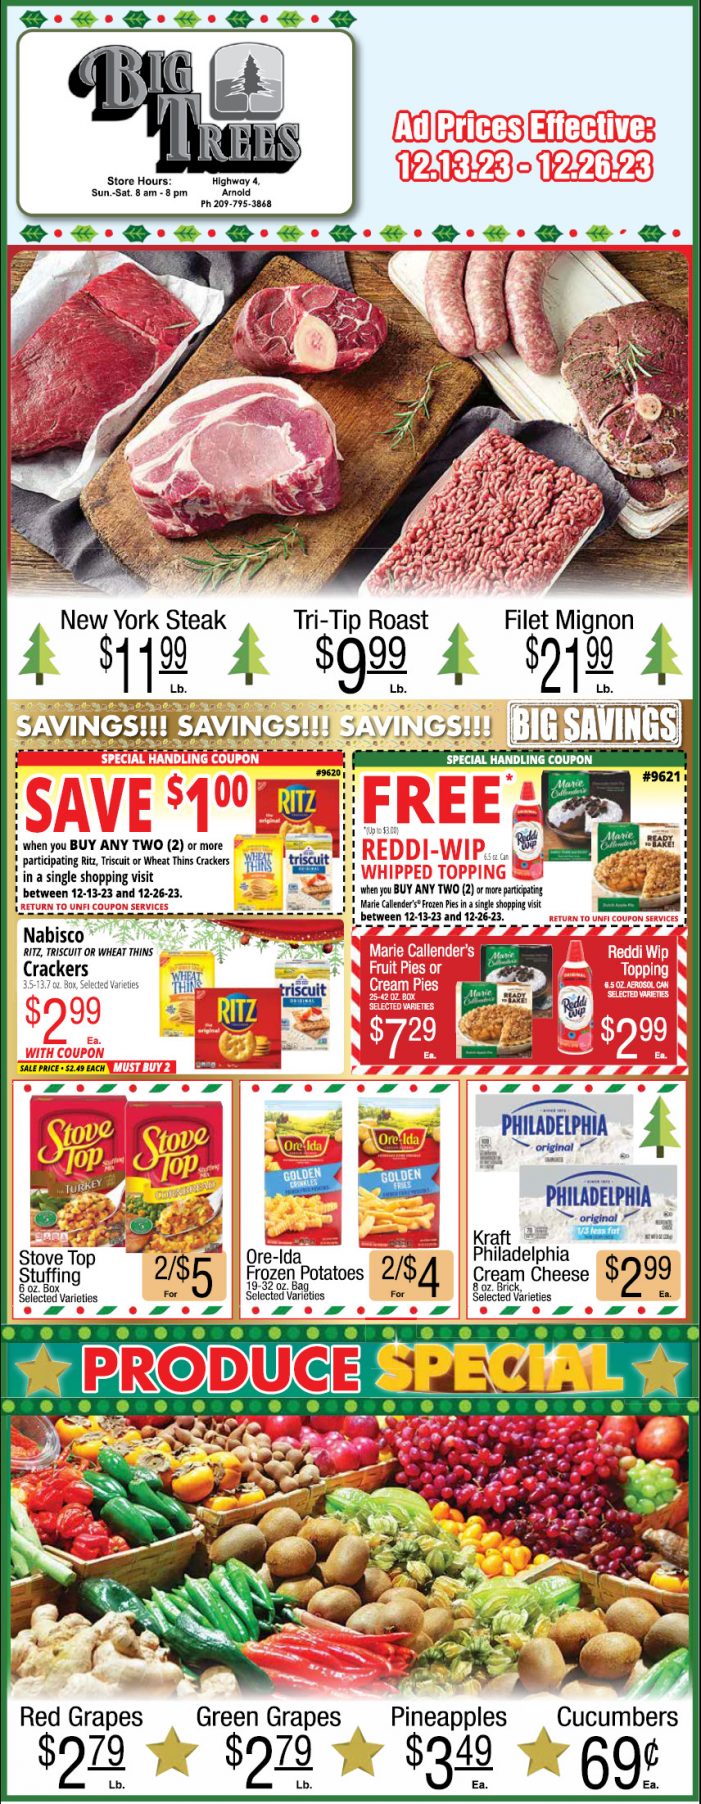 Big Trees Market Big Christmas Ad, Grocery, Produce, Meat & Deli Specials Through December 26th! Shop Local & Save!